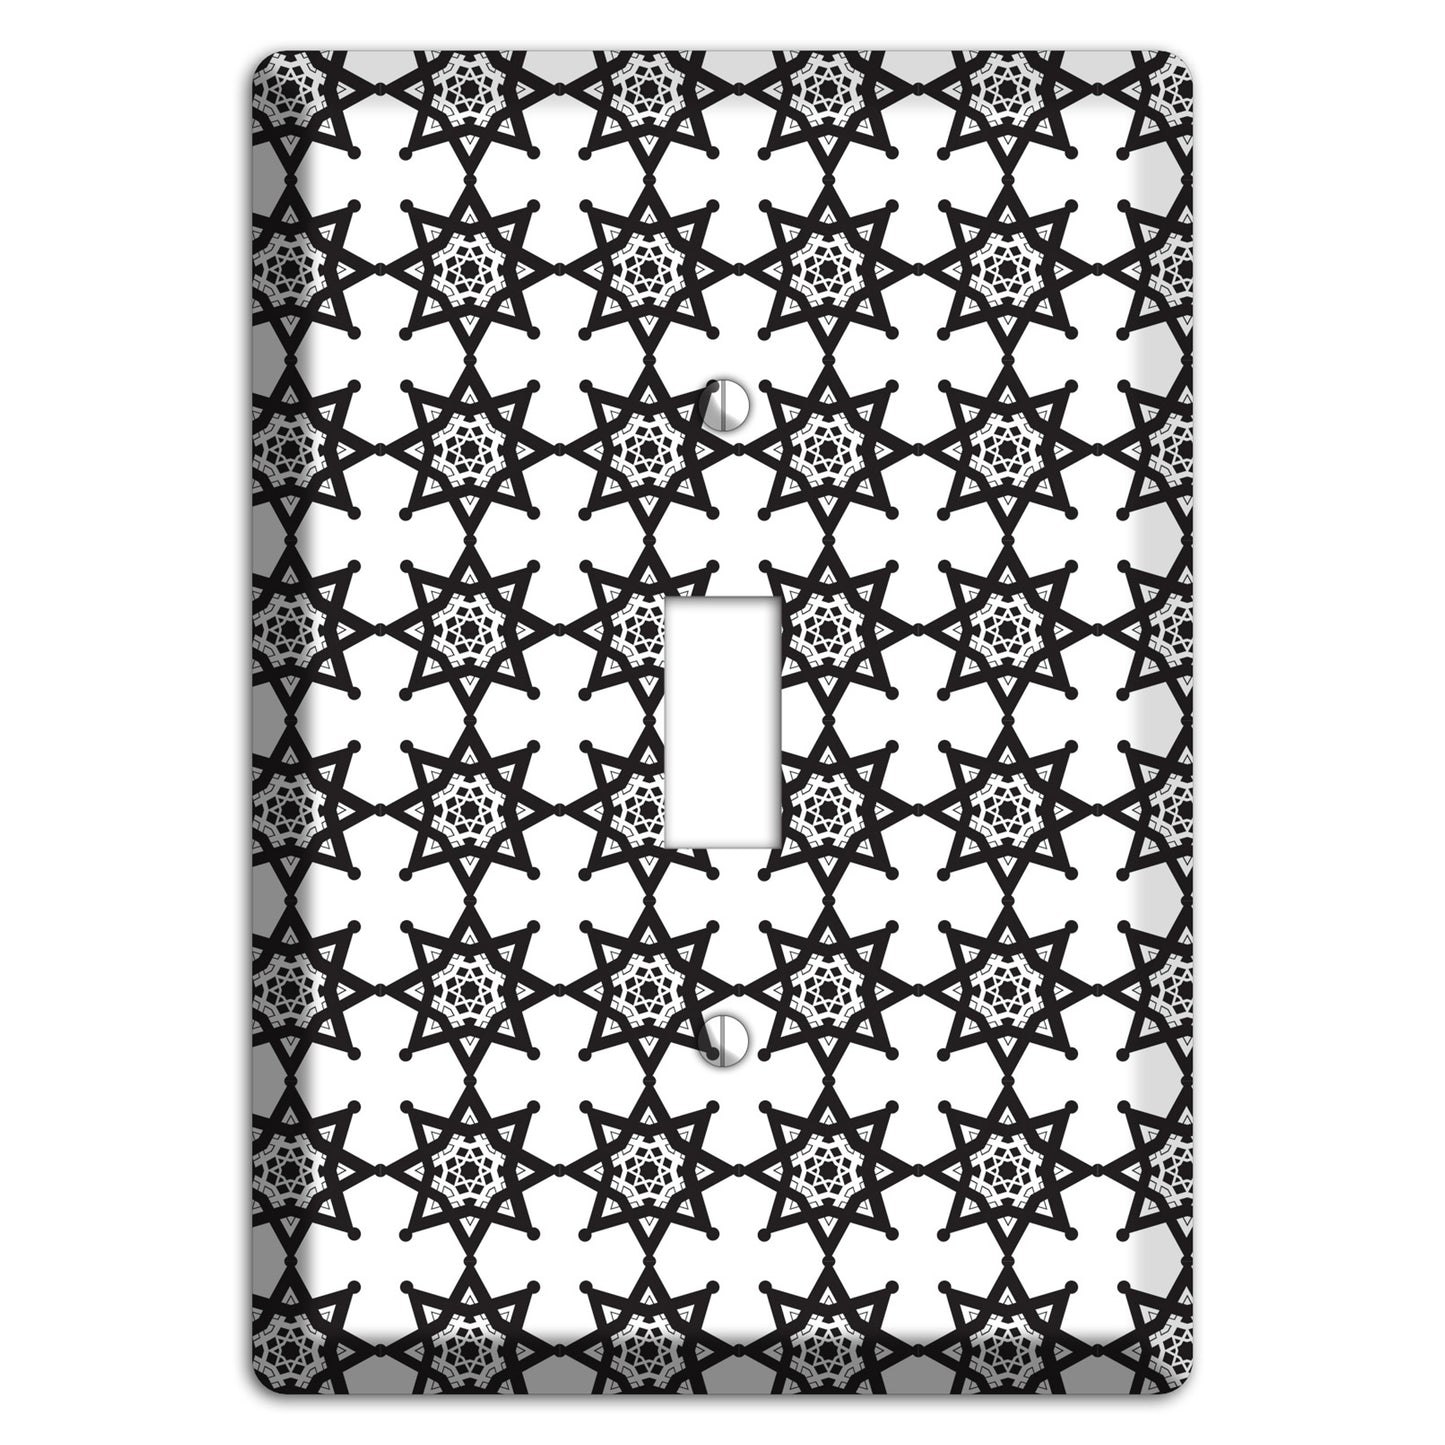 White with Black Arabesque Aster Cover Plates